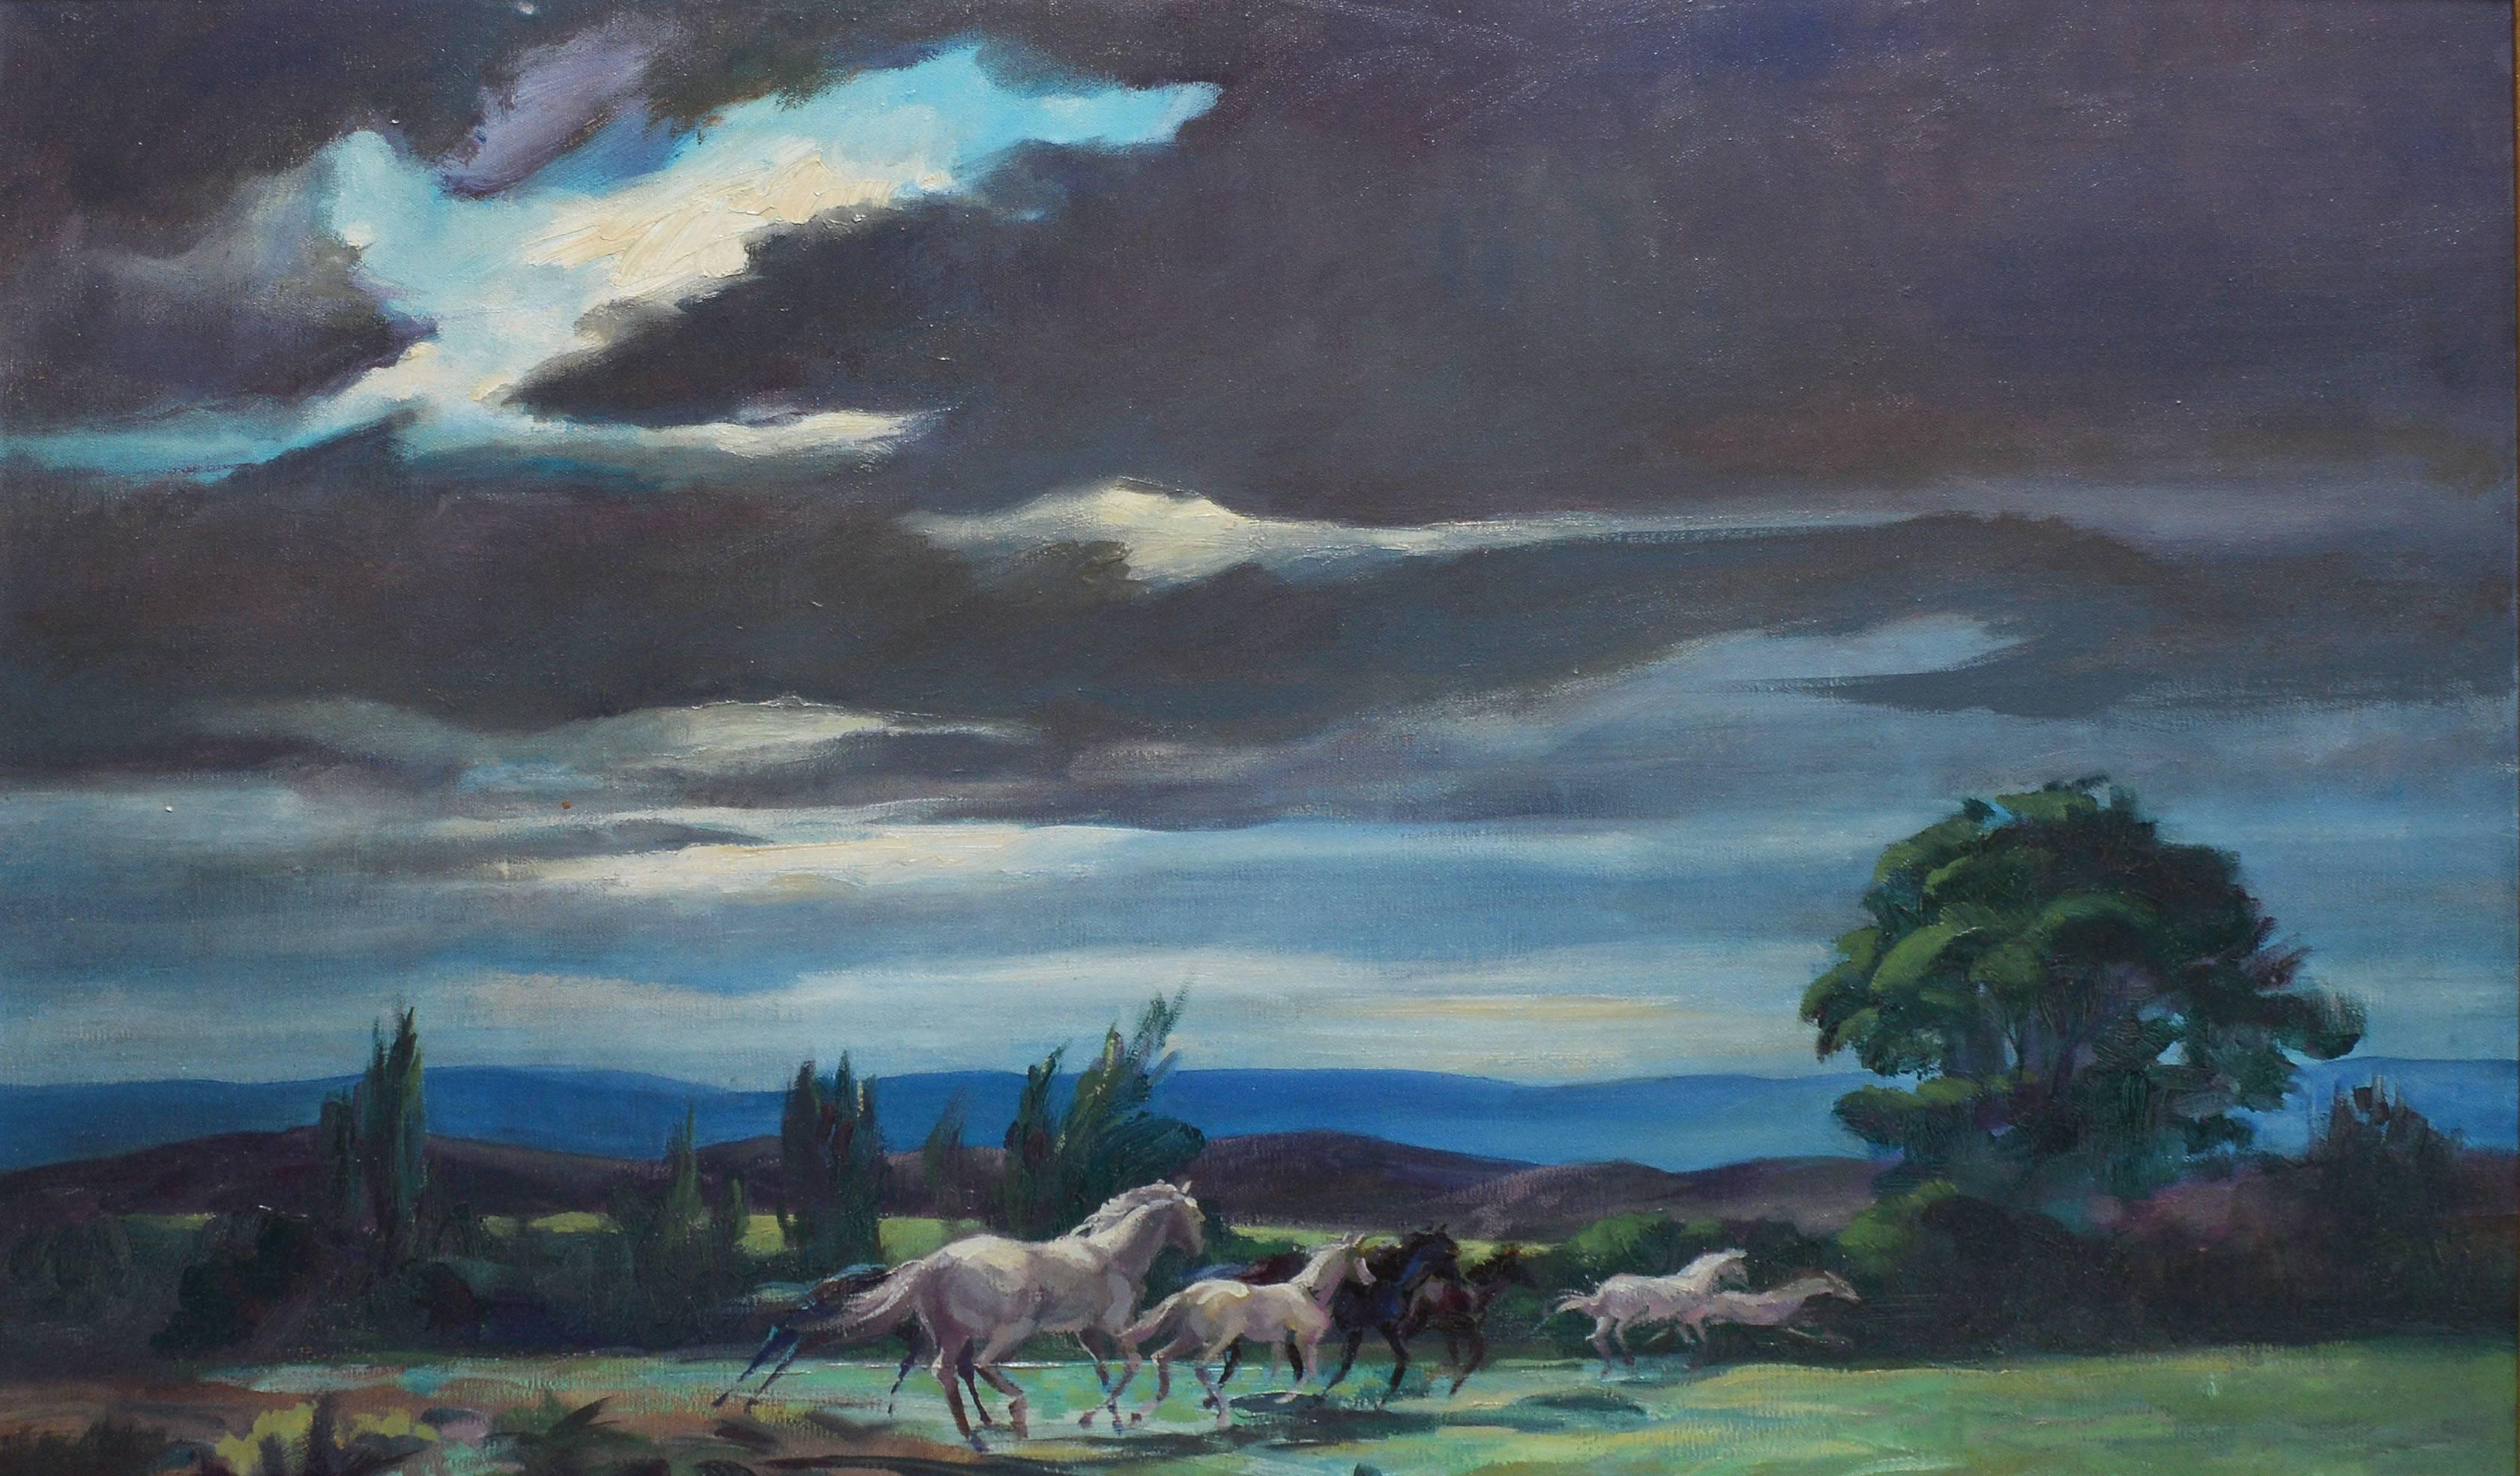 Impressionist view of a landscape with wild horses by Lumen Winter  (1908 - 1982).  Oil on canvas, circa 1950.  Signed lower right, 